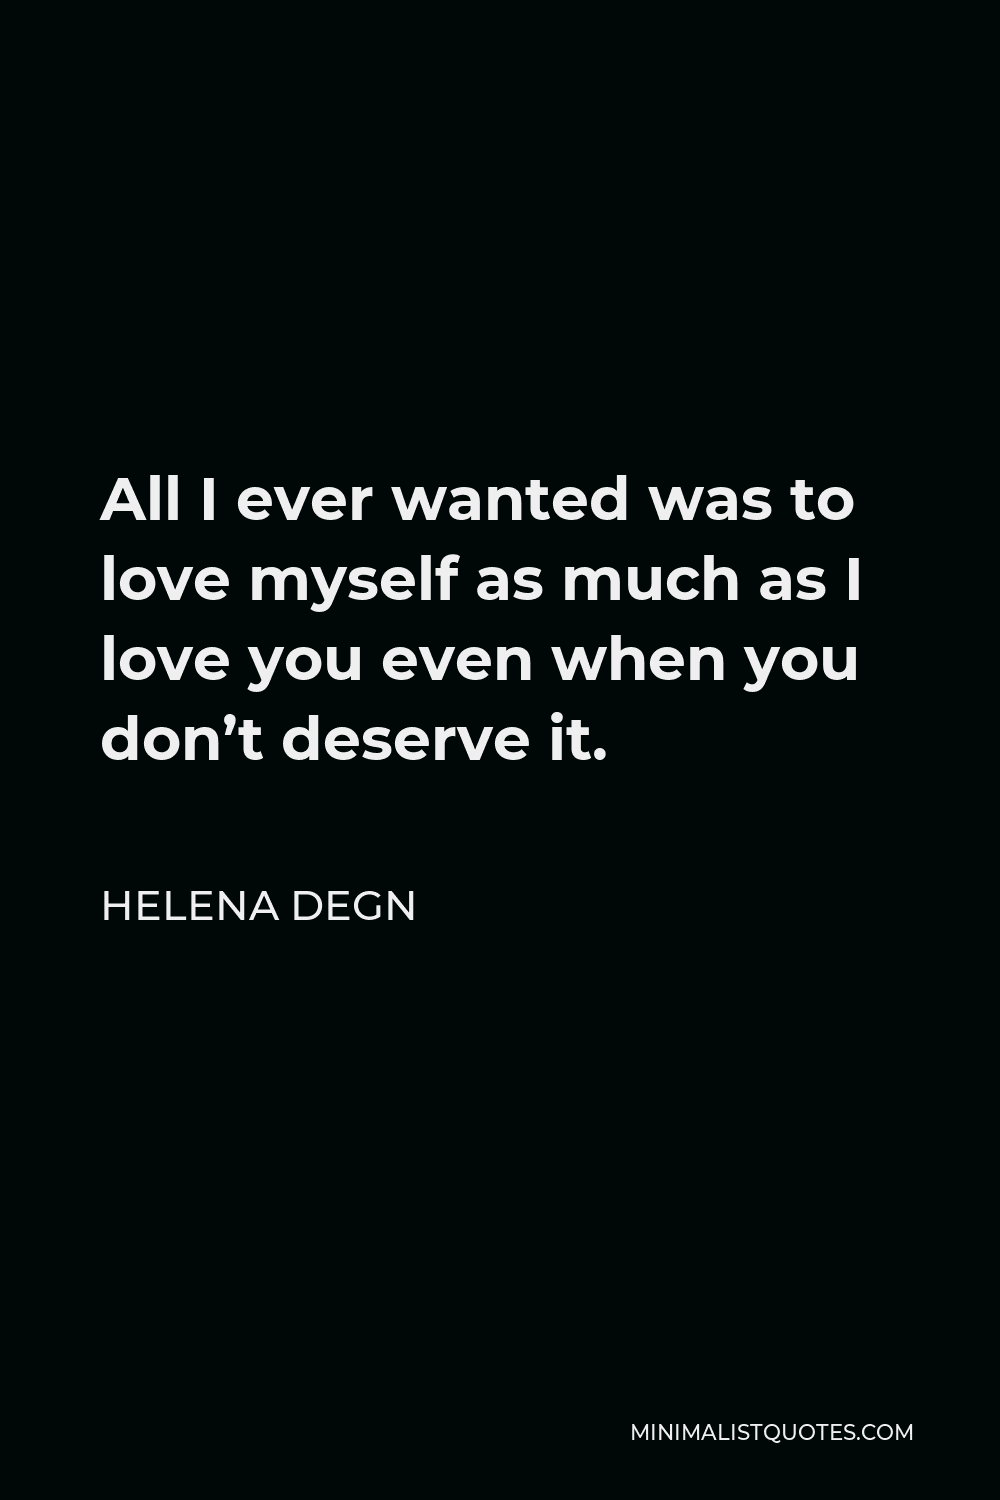 Helena Degn Quote - All I ever wanted was to love myself as much as I love you even when you don’t deserve it.